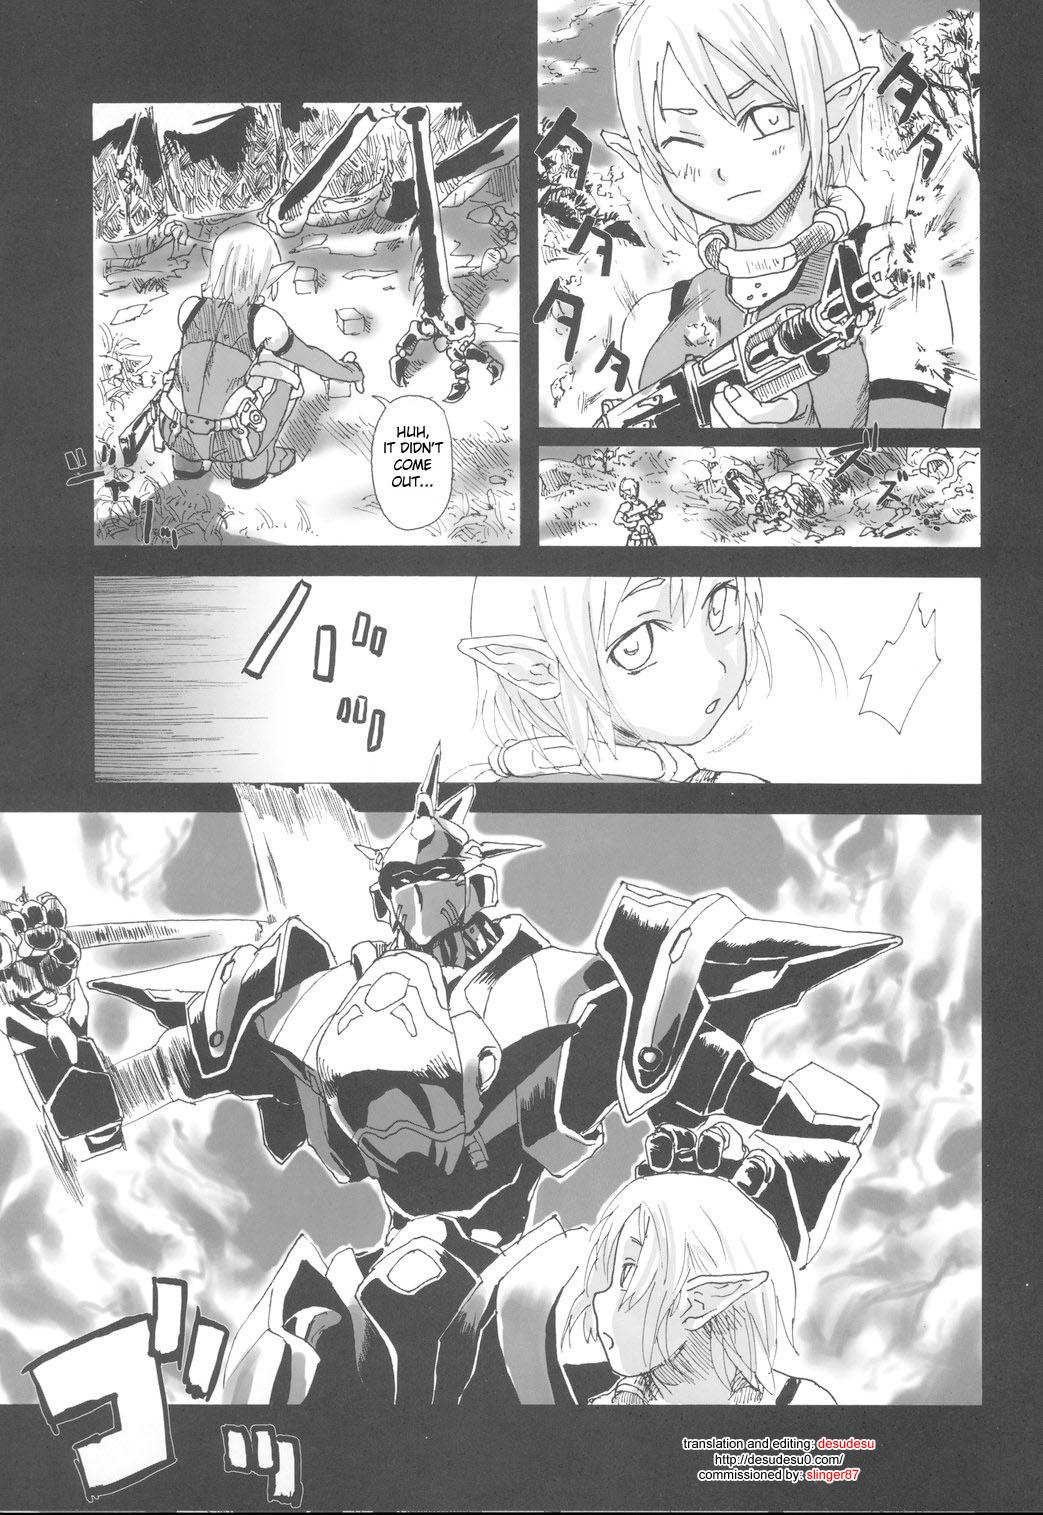 The Gareki 2 - Rising Force - Rising force online Indonesian - Page 3